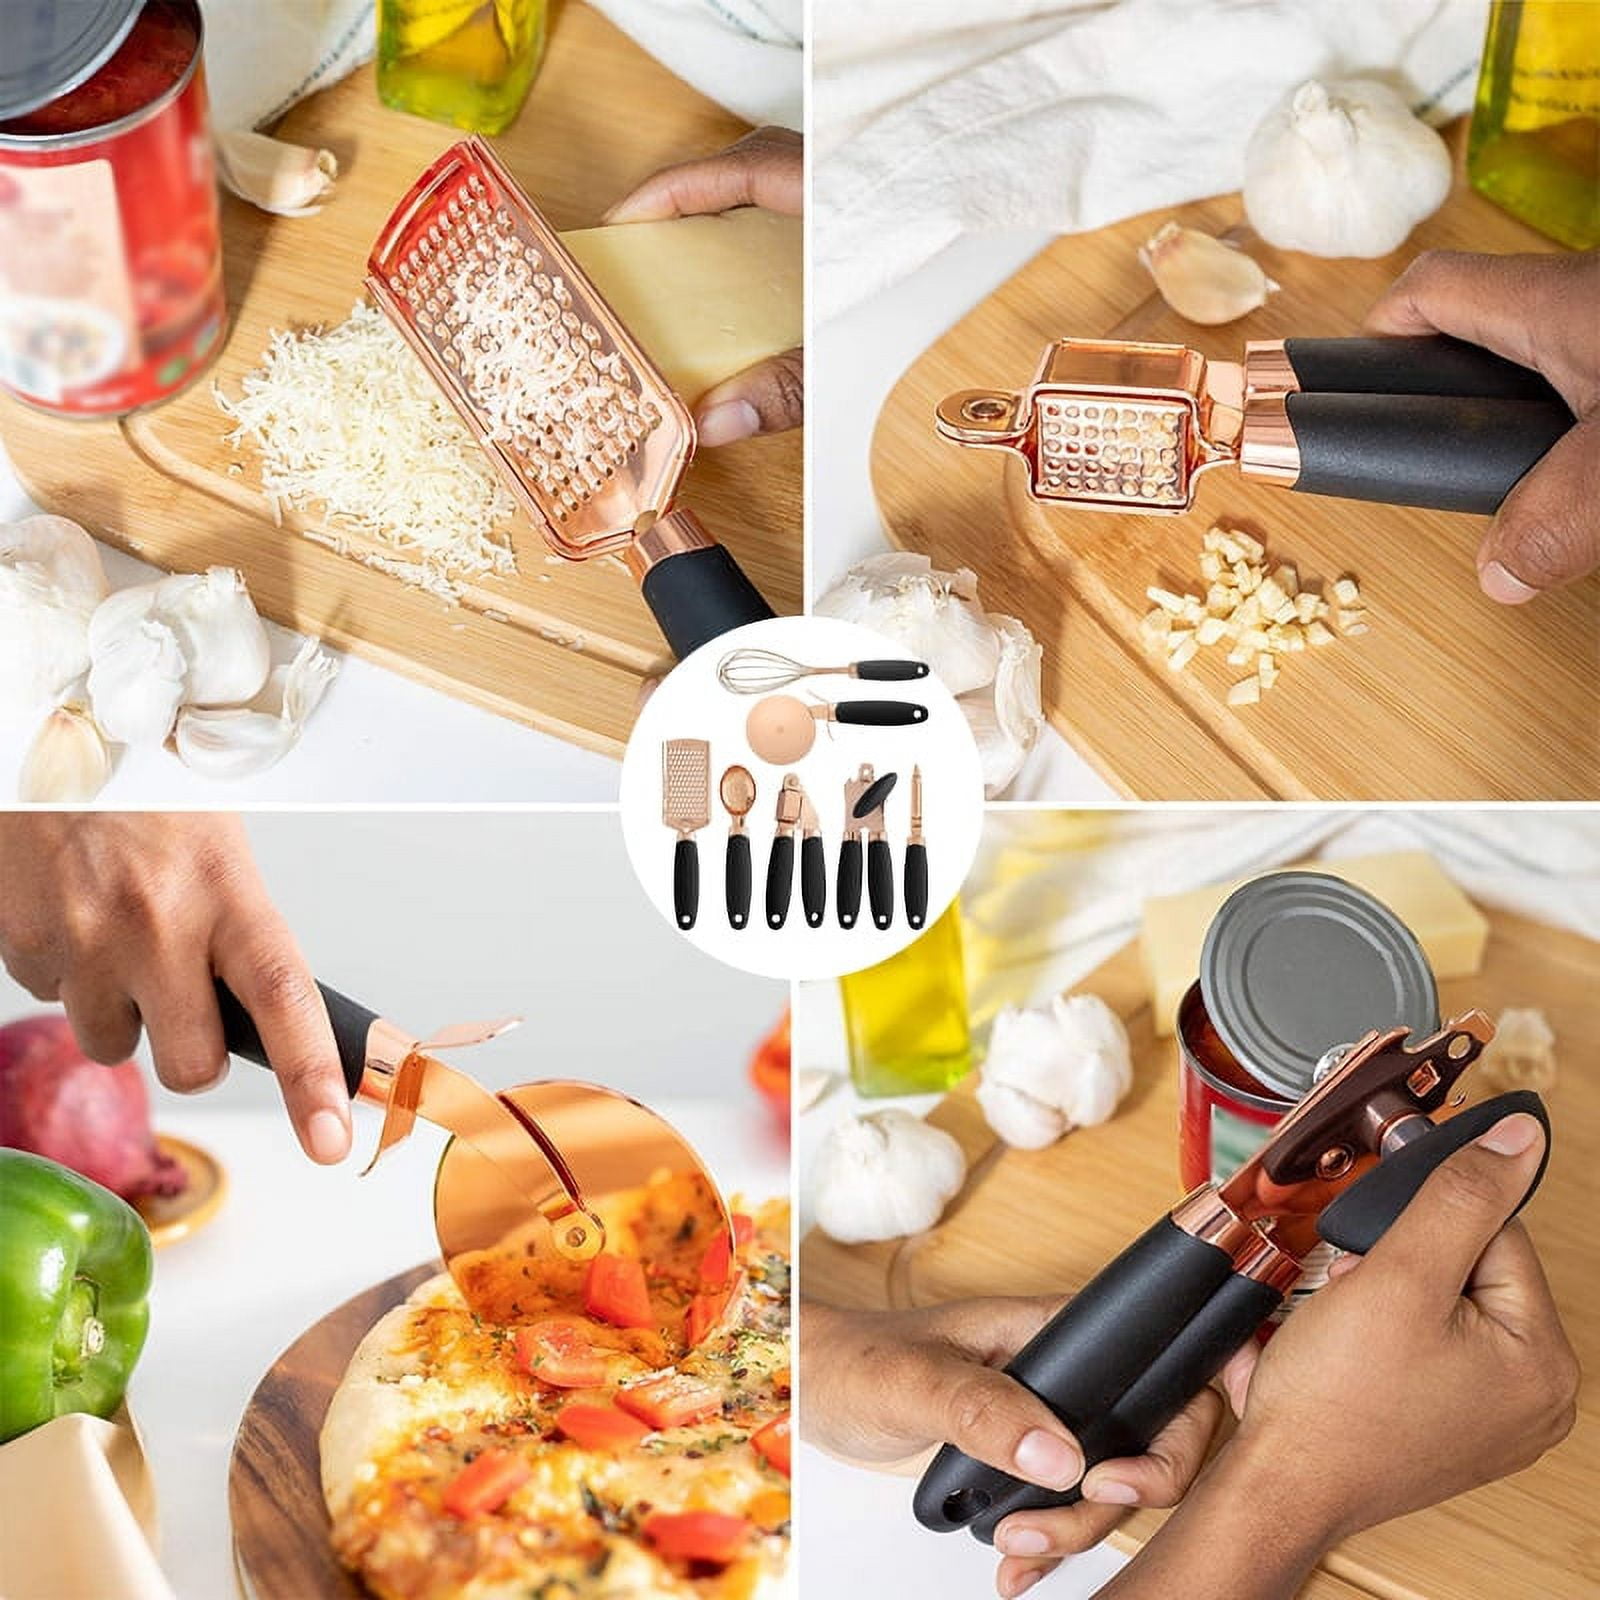 5 Pieces Kitchen Gadgets Set - Space Saving Cooking Tools Accessories  Cheese Chocolate Grater, Fruit Vegetable Peeler, Bottle Opener, Pizza  Cutter, Burlap Bags with Drawstring Gift Set… - Yahoo Shopping